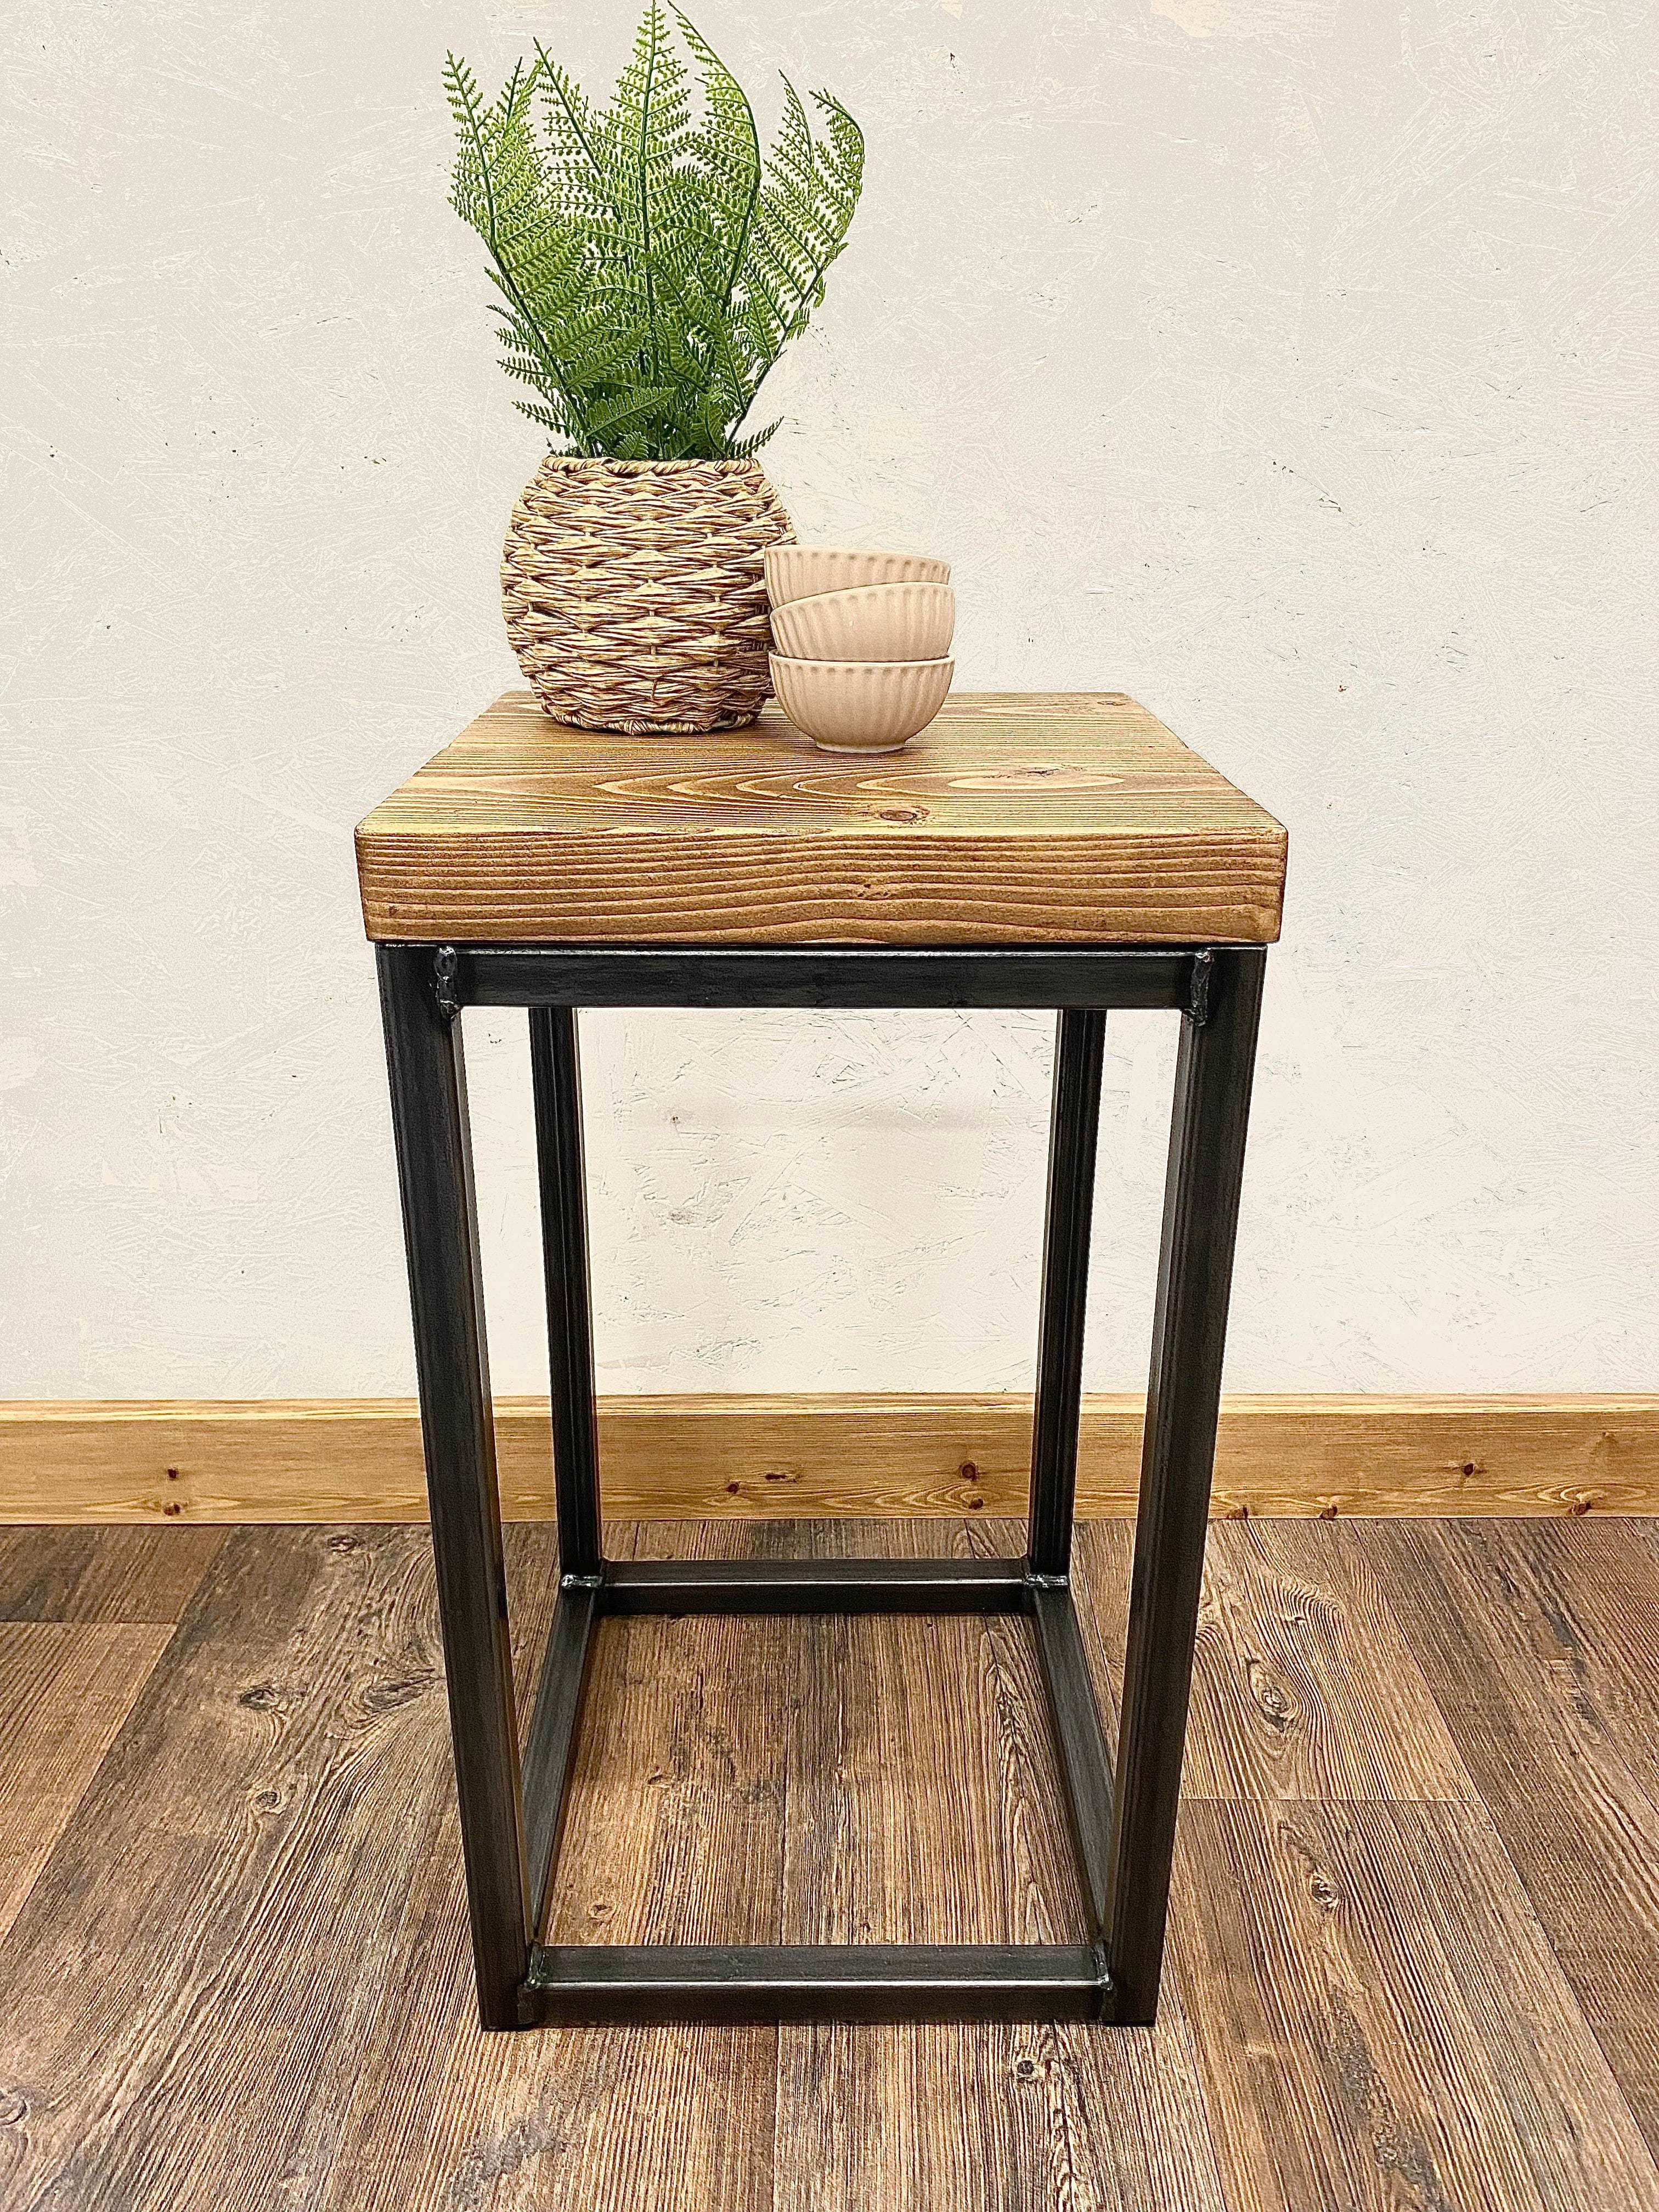 Industrial Style Side table - Wood and Metal Small medium side table FREE DELIVERY   